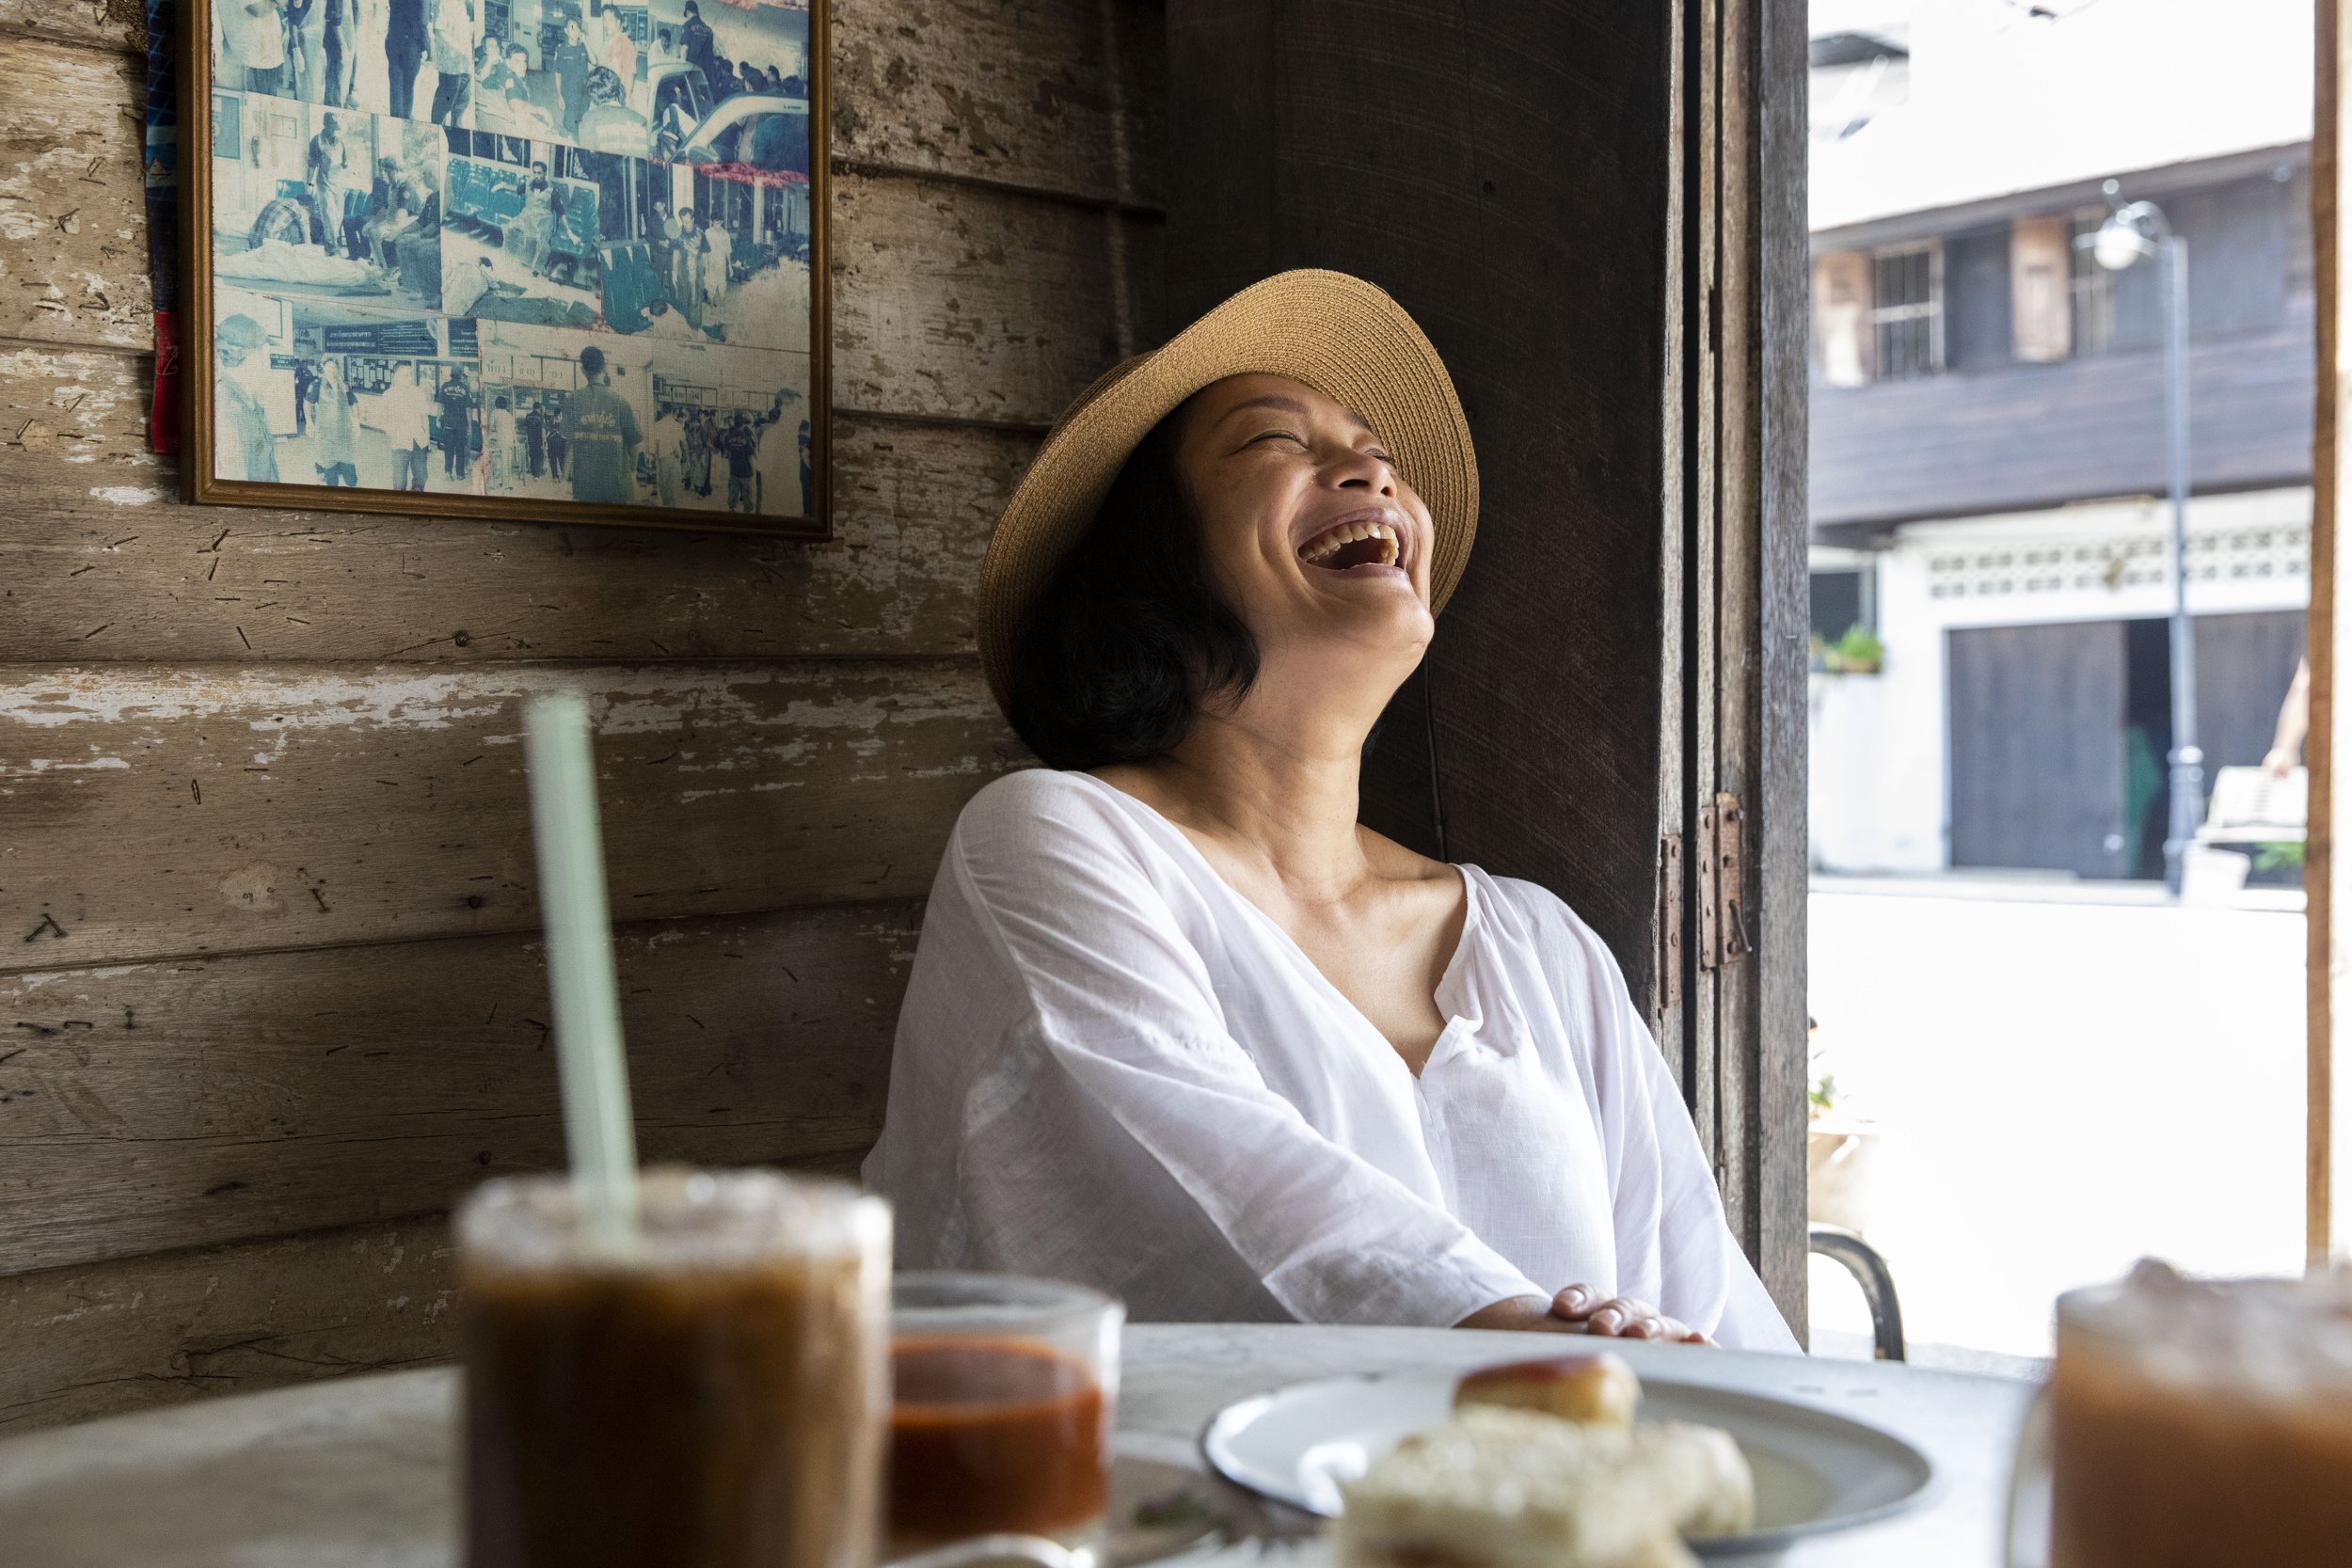  Chutatip “Nok” Suntaranon laughs while having an afternoon coffee in an old shop in Yantakhao, Thailand on Saturday, April 16, 2022. Nok traveled from Philadelphia to her home, Thailand, to visit with family and research for her upcoming projects.  